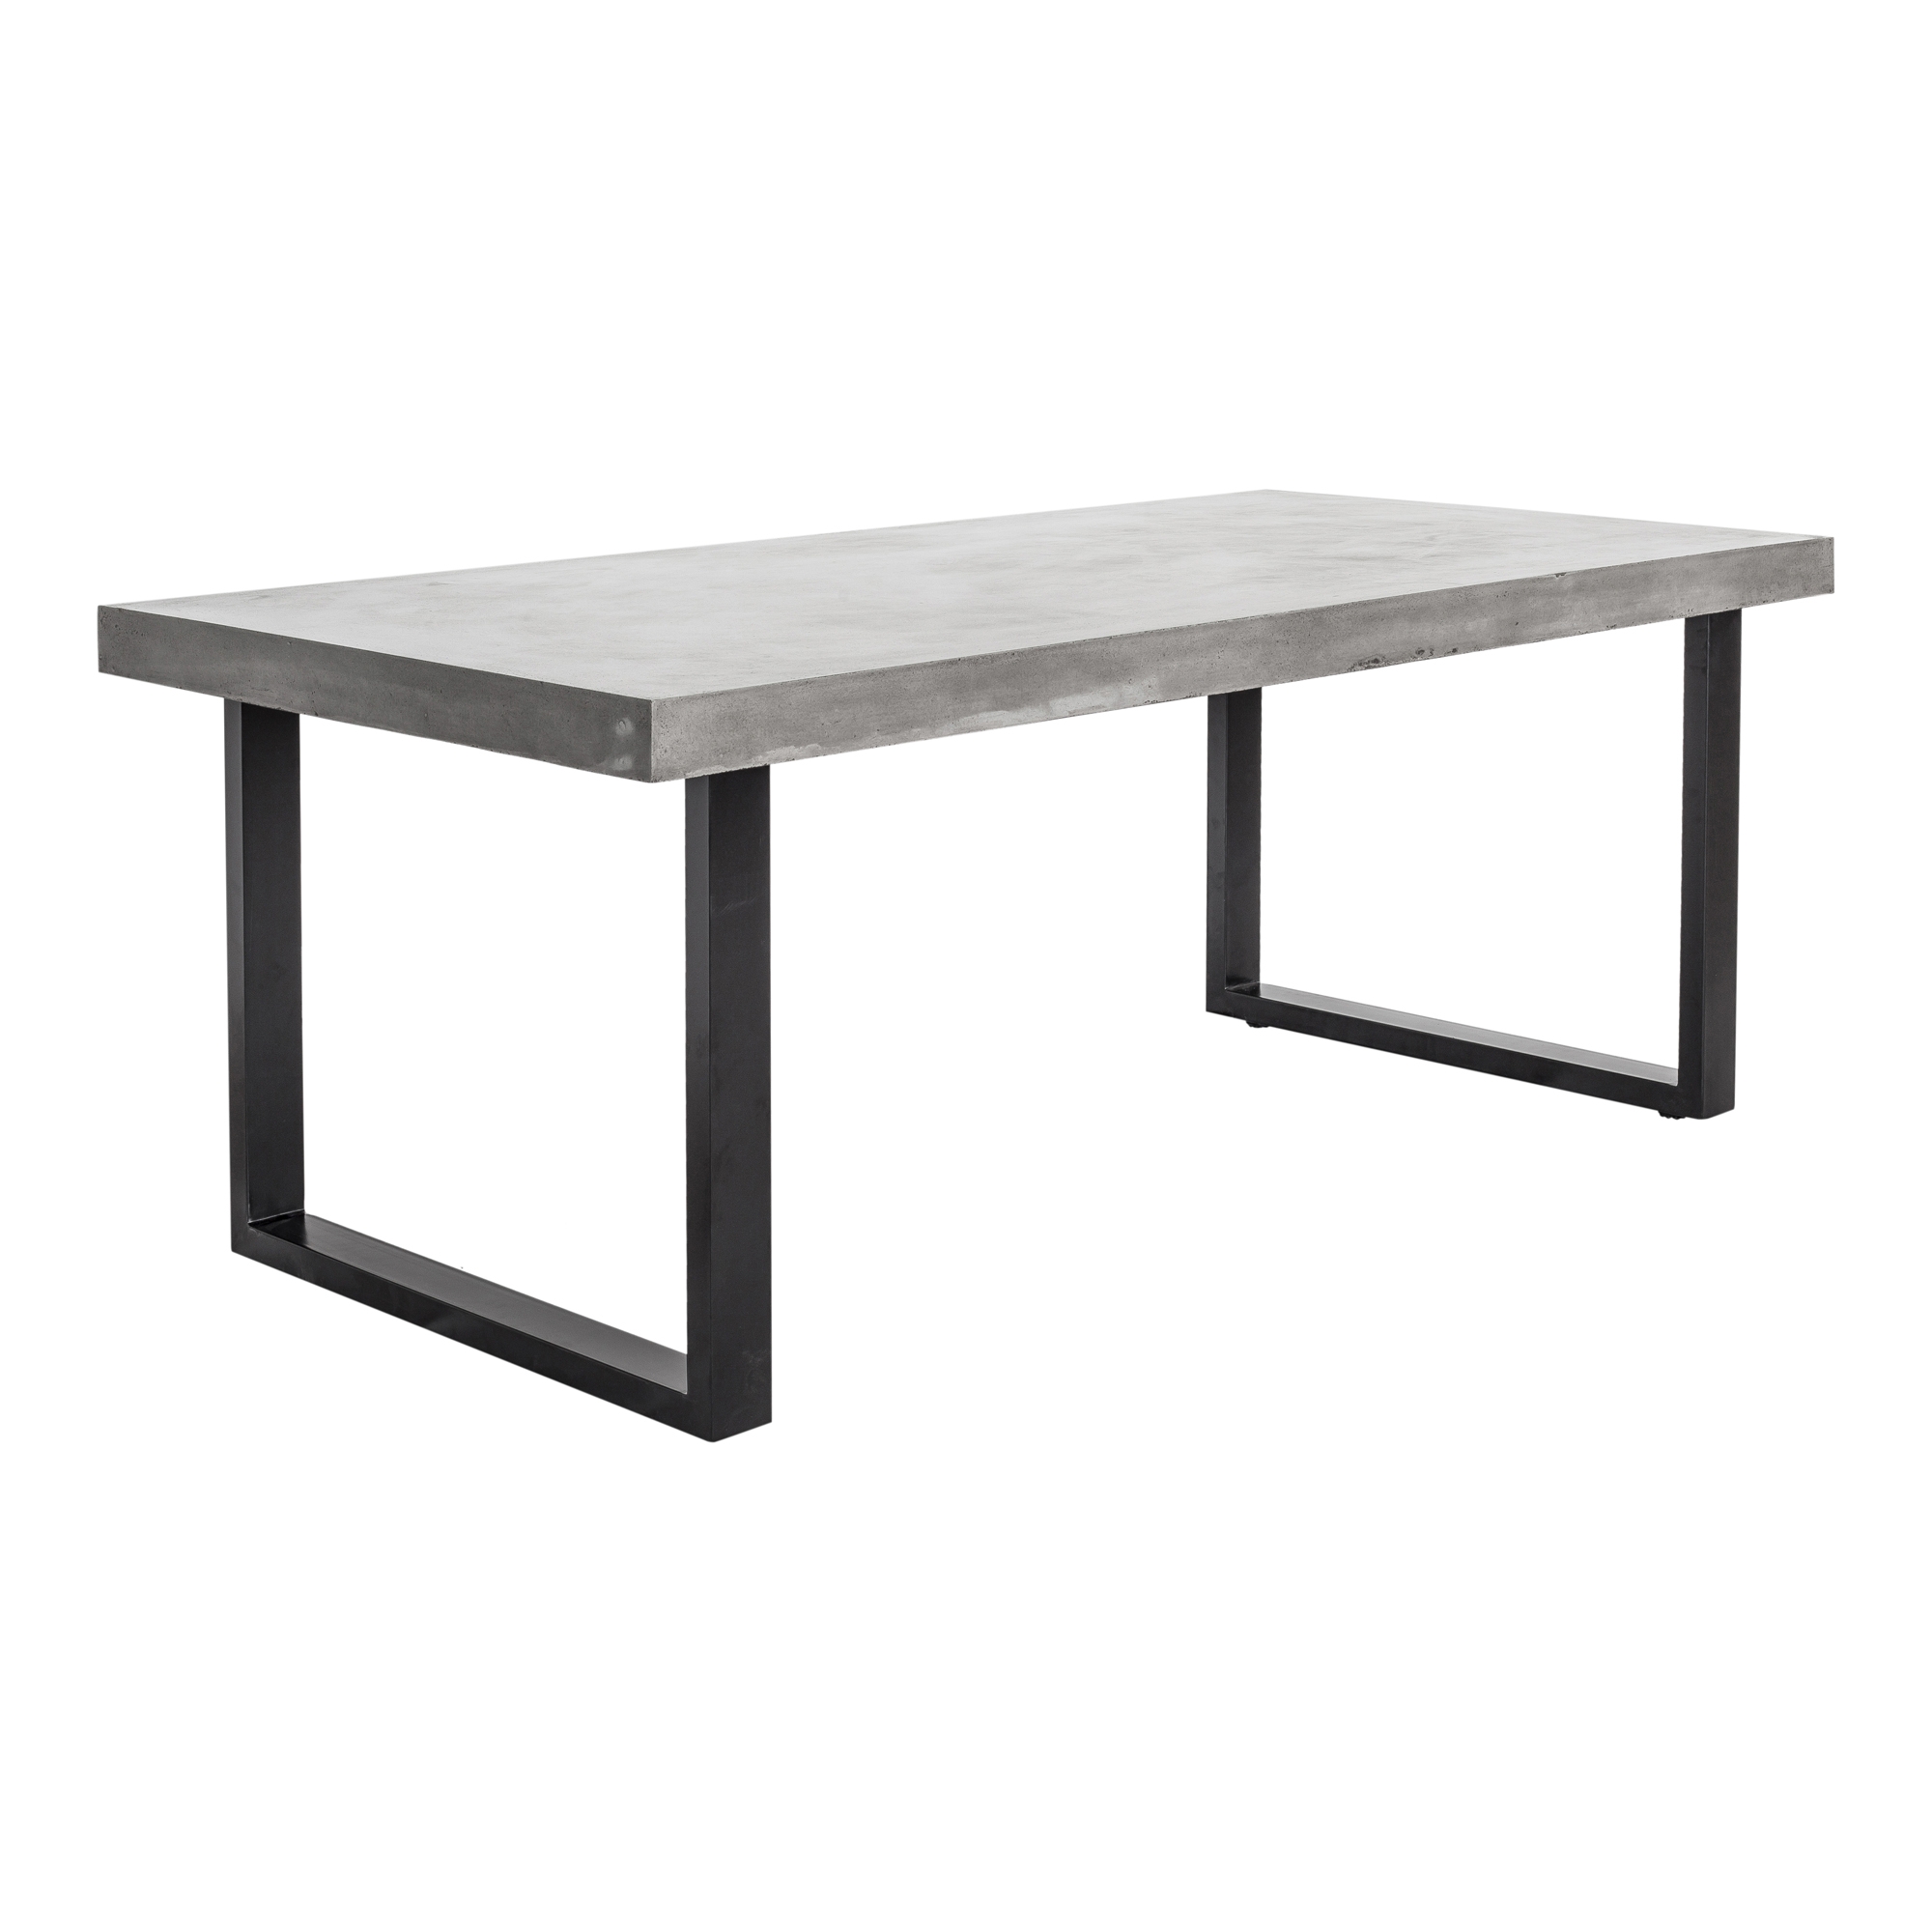 Jedrik Outdoor Dining Table Large - Image 1